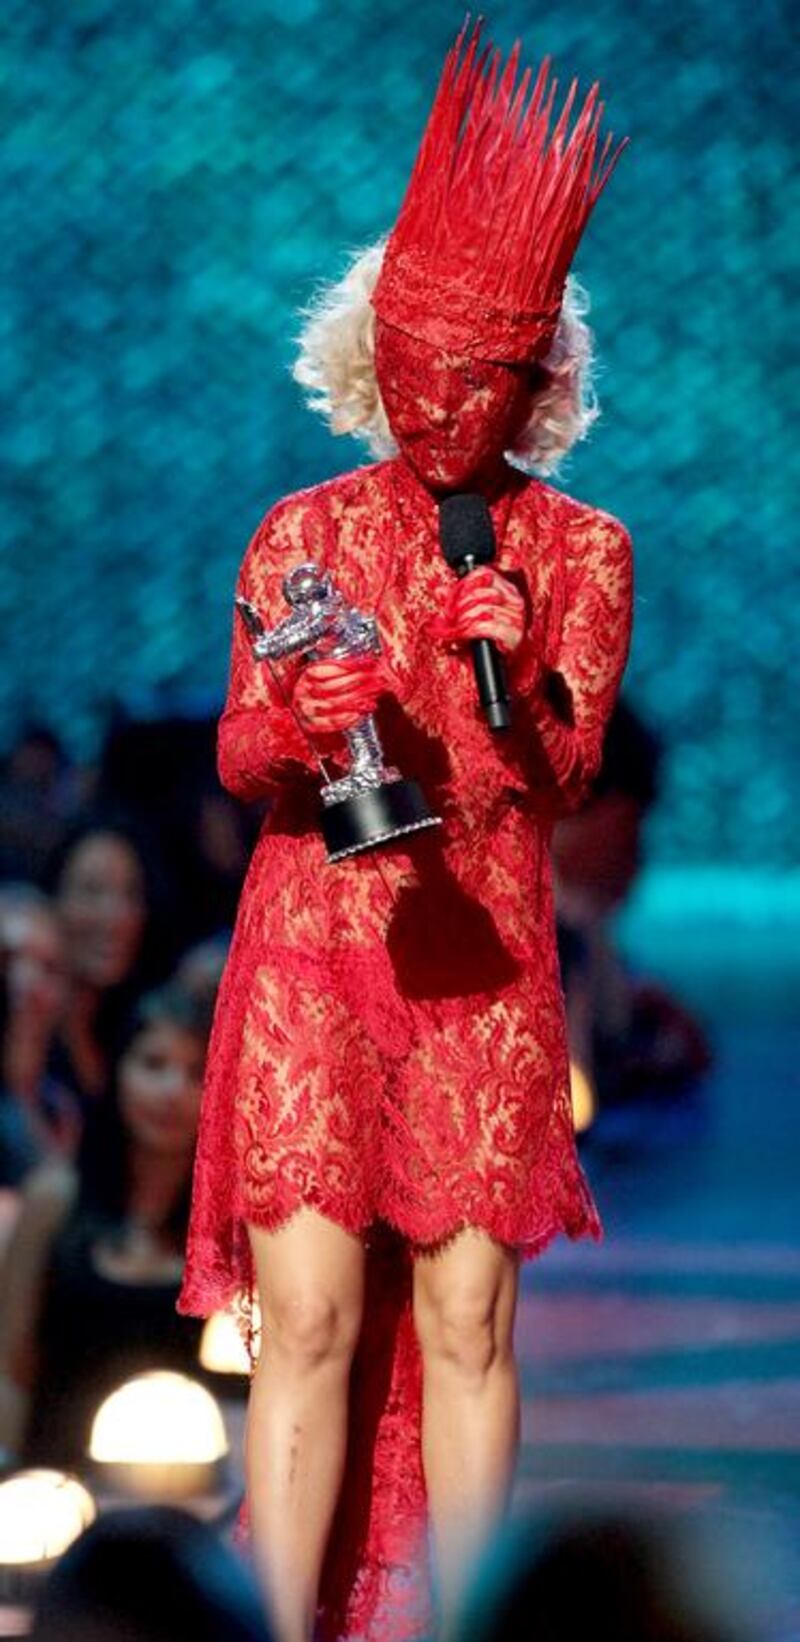 Lady Gaga accepts the award for Best New Artist during the 2009 MTV Video Music Awards at Radio City Music Hall on September 13, 2009 in New York City. Christopher Polk / Getty Images / AFP